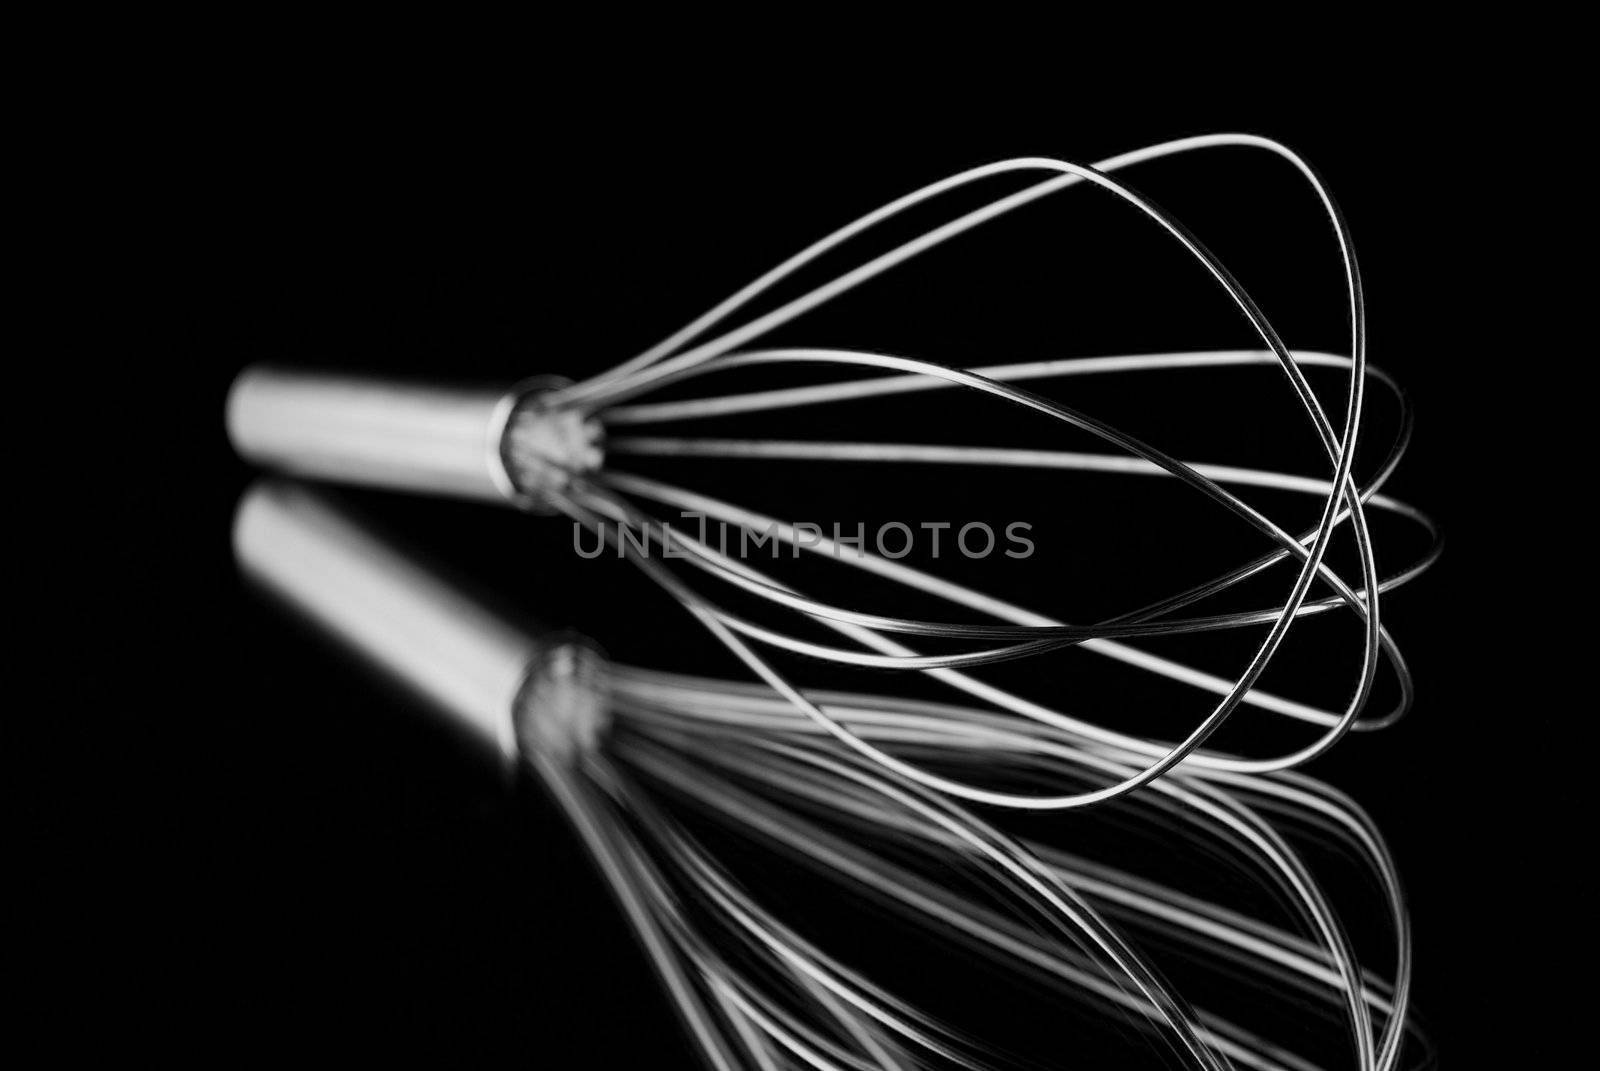 Single whisk reflection with black background